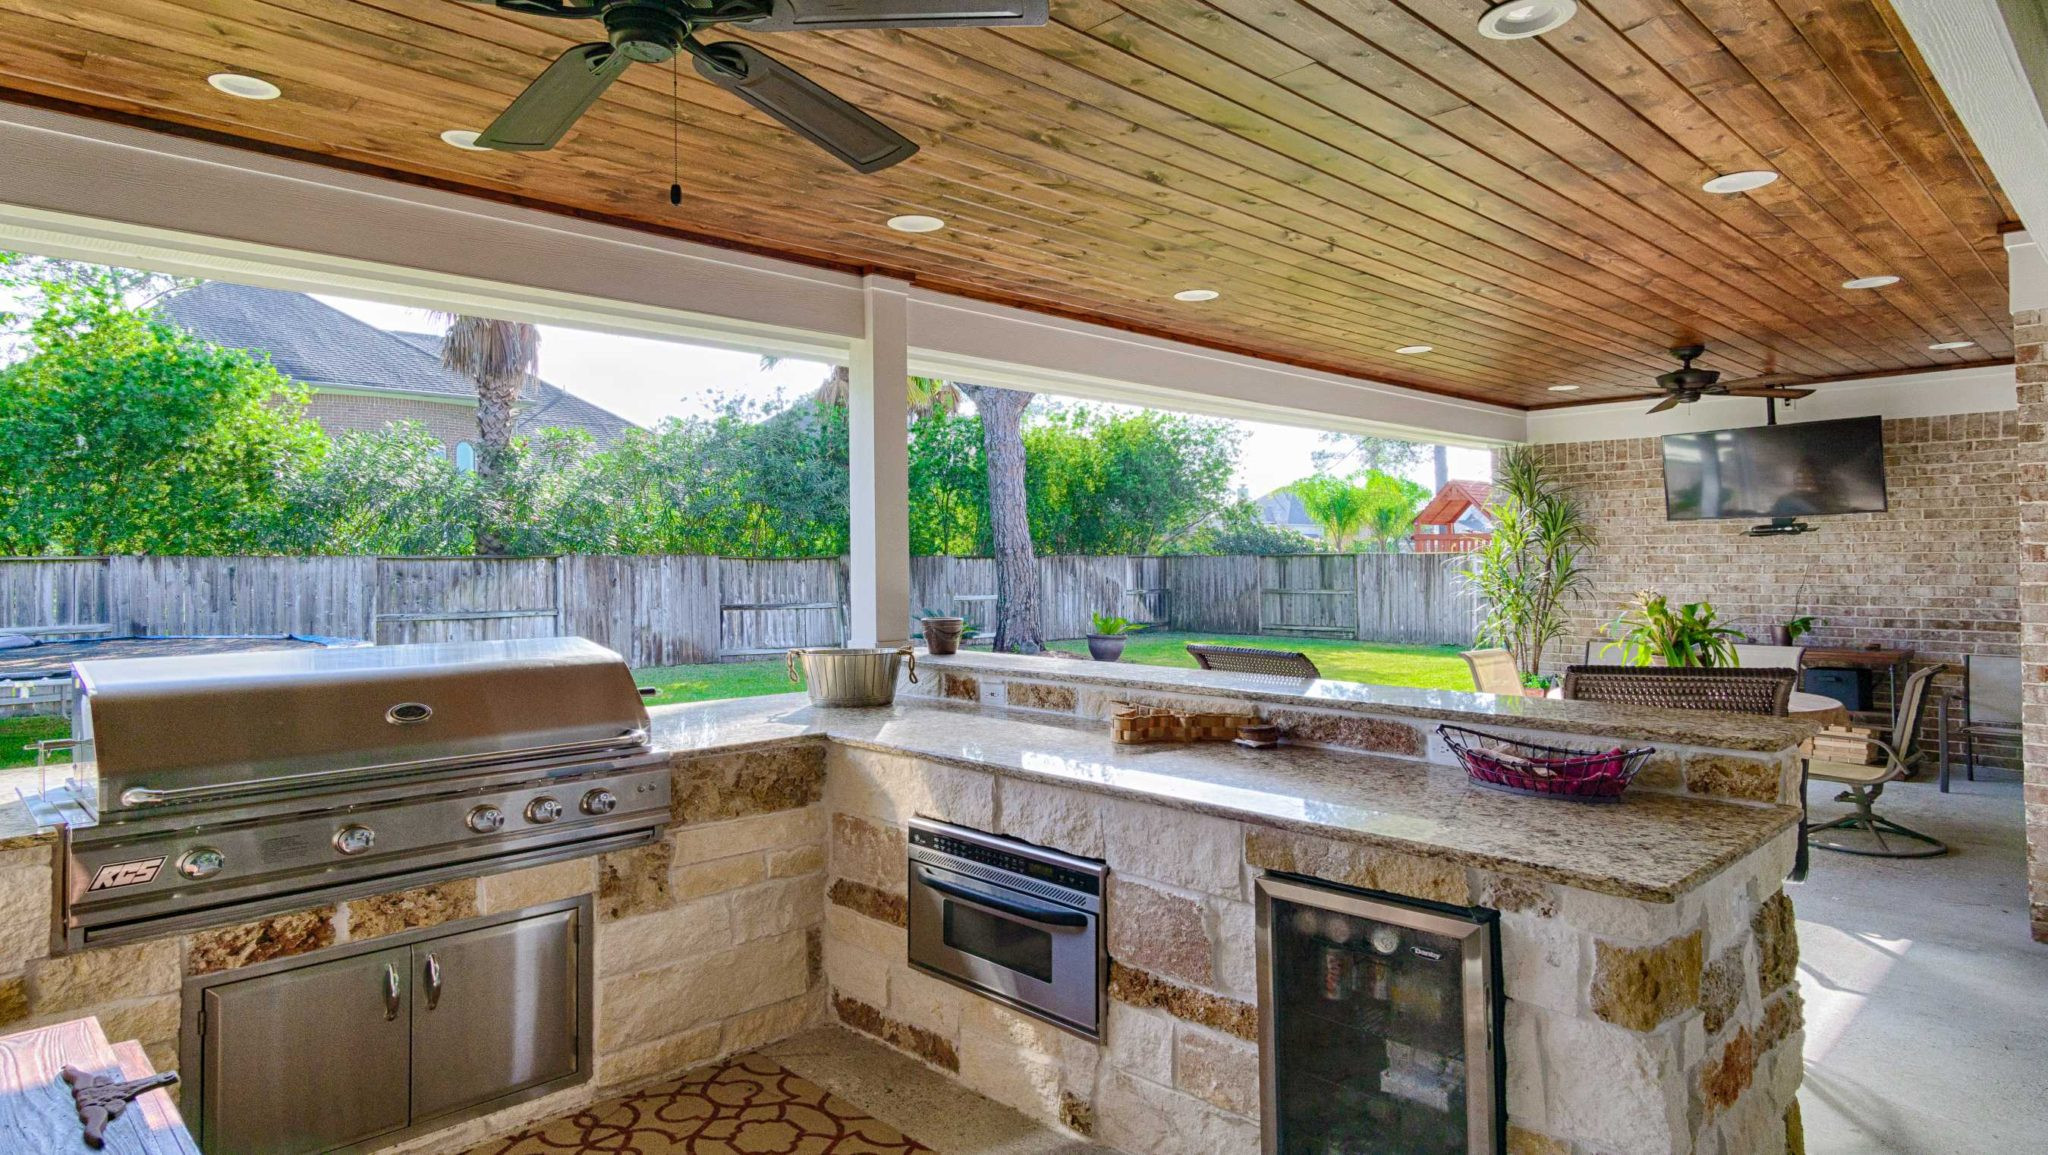 Outdoor Patio Kitchen Designs
 The Woodlands Outdoor Kitchen & Covered Patio Construction